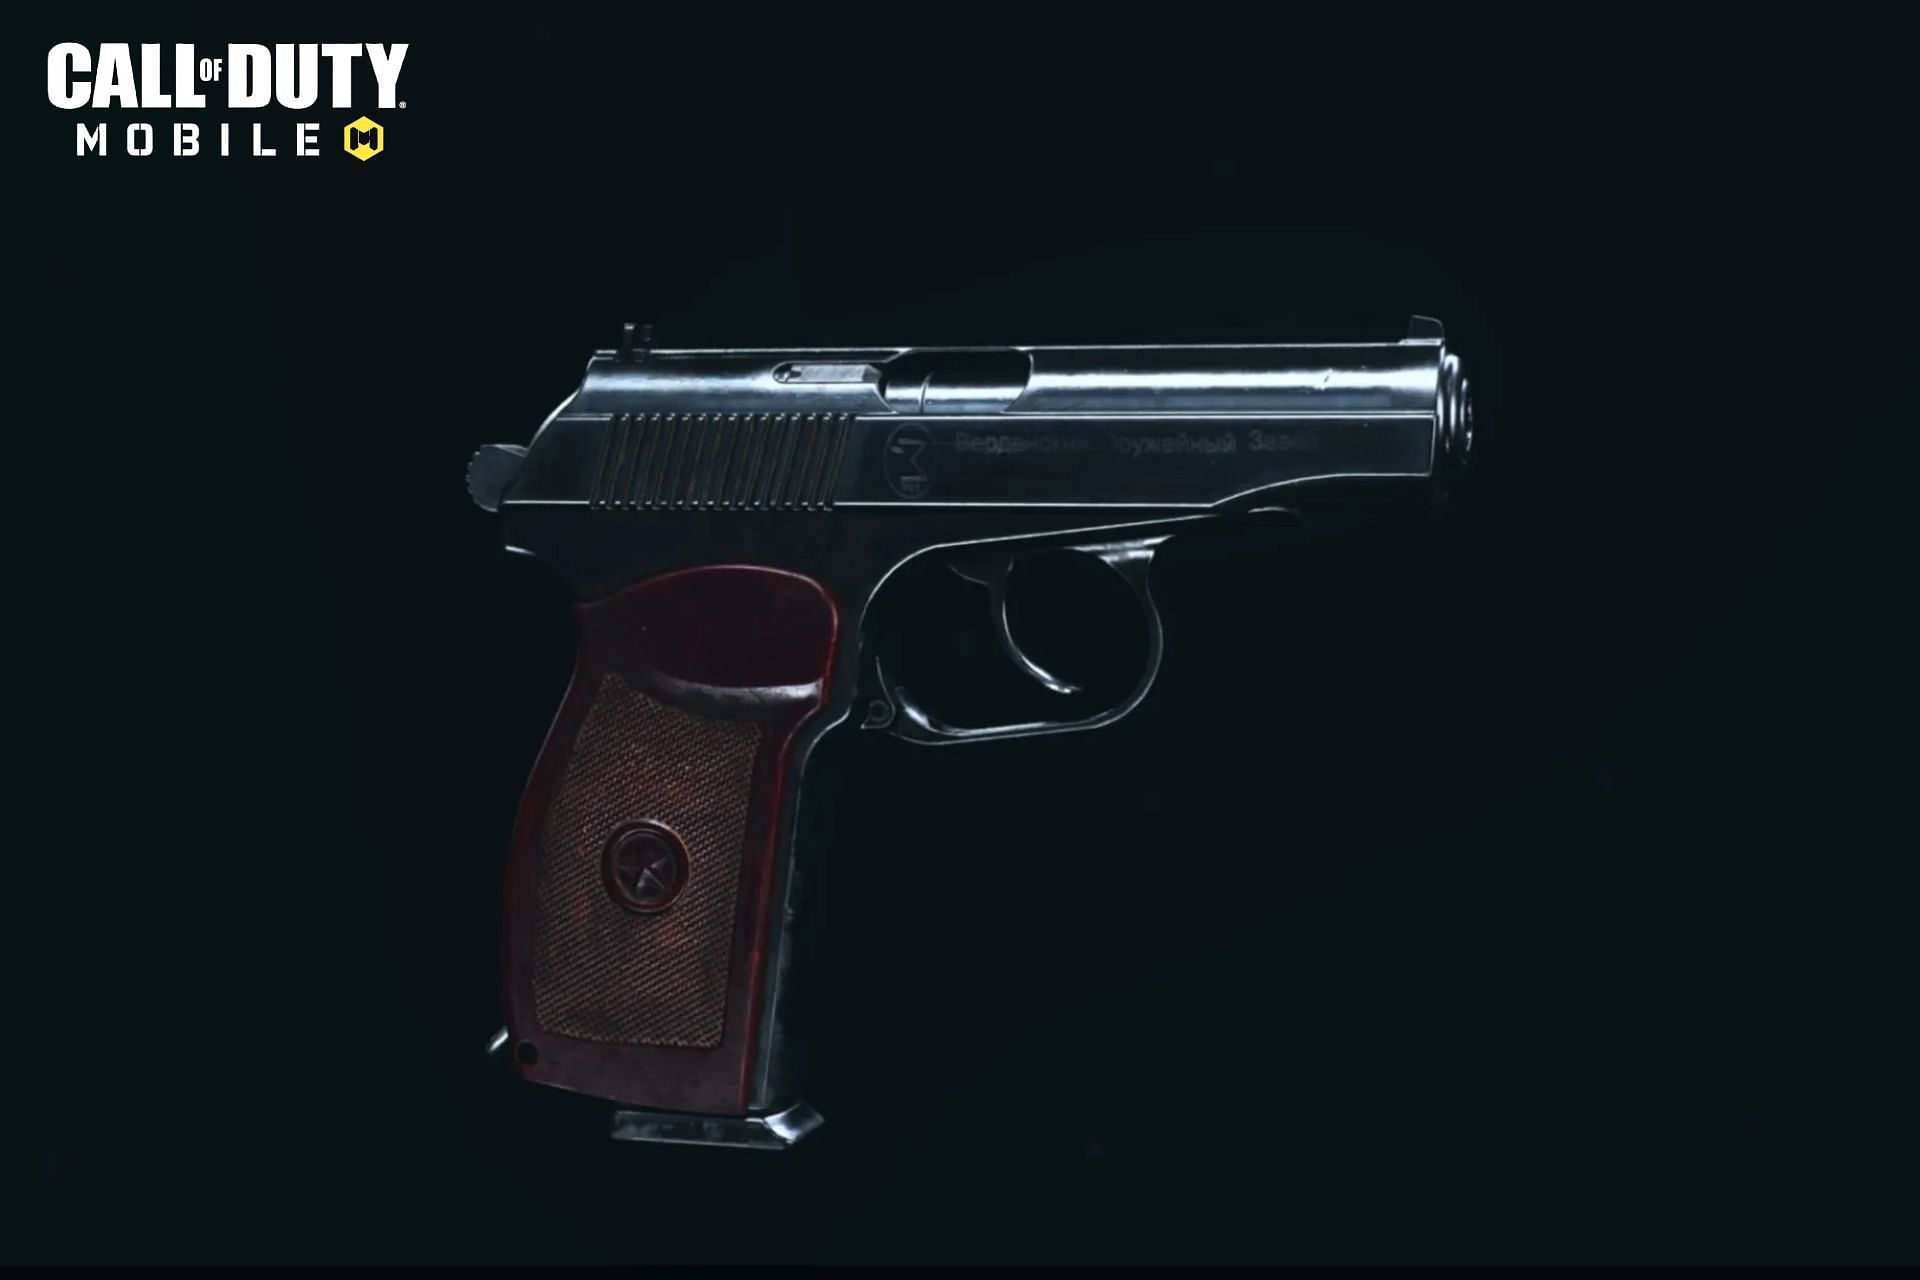 Sykov pistol might arrive as a new secondary weapon in Call of Duty Mobile Season 4 (Image via Activision)